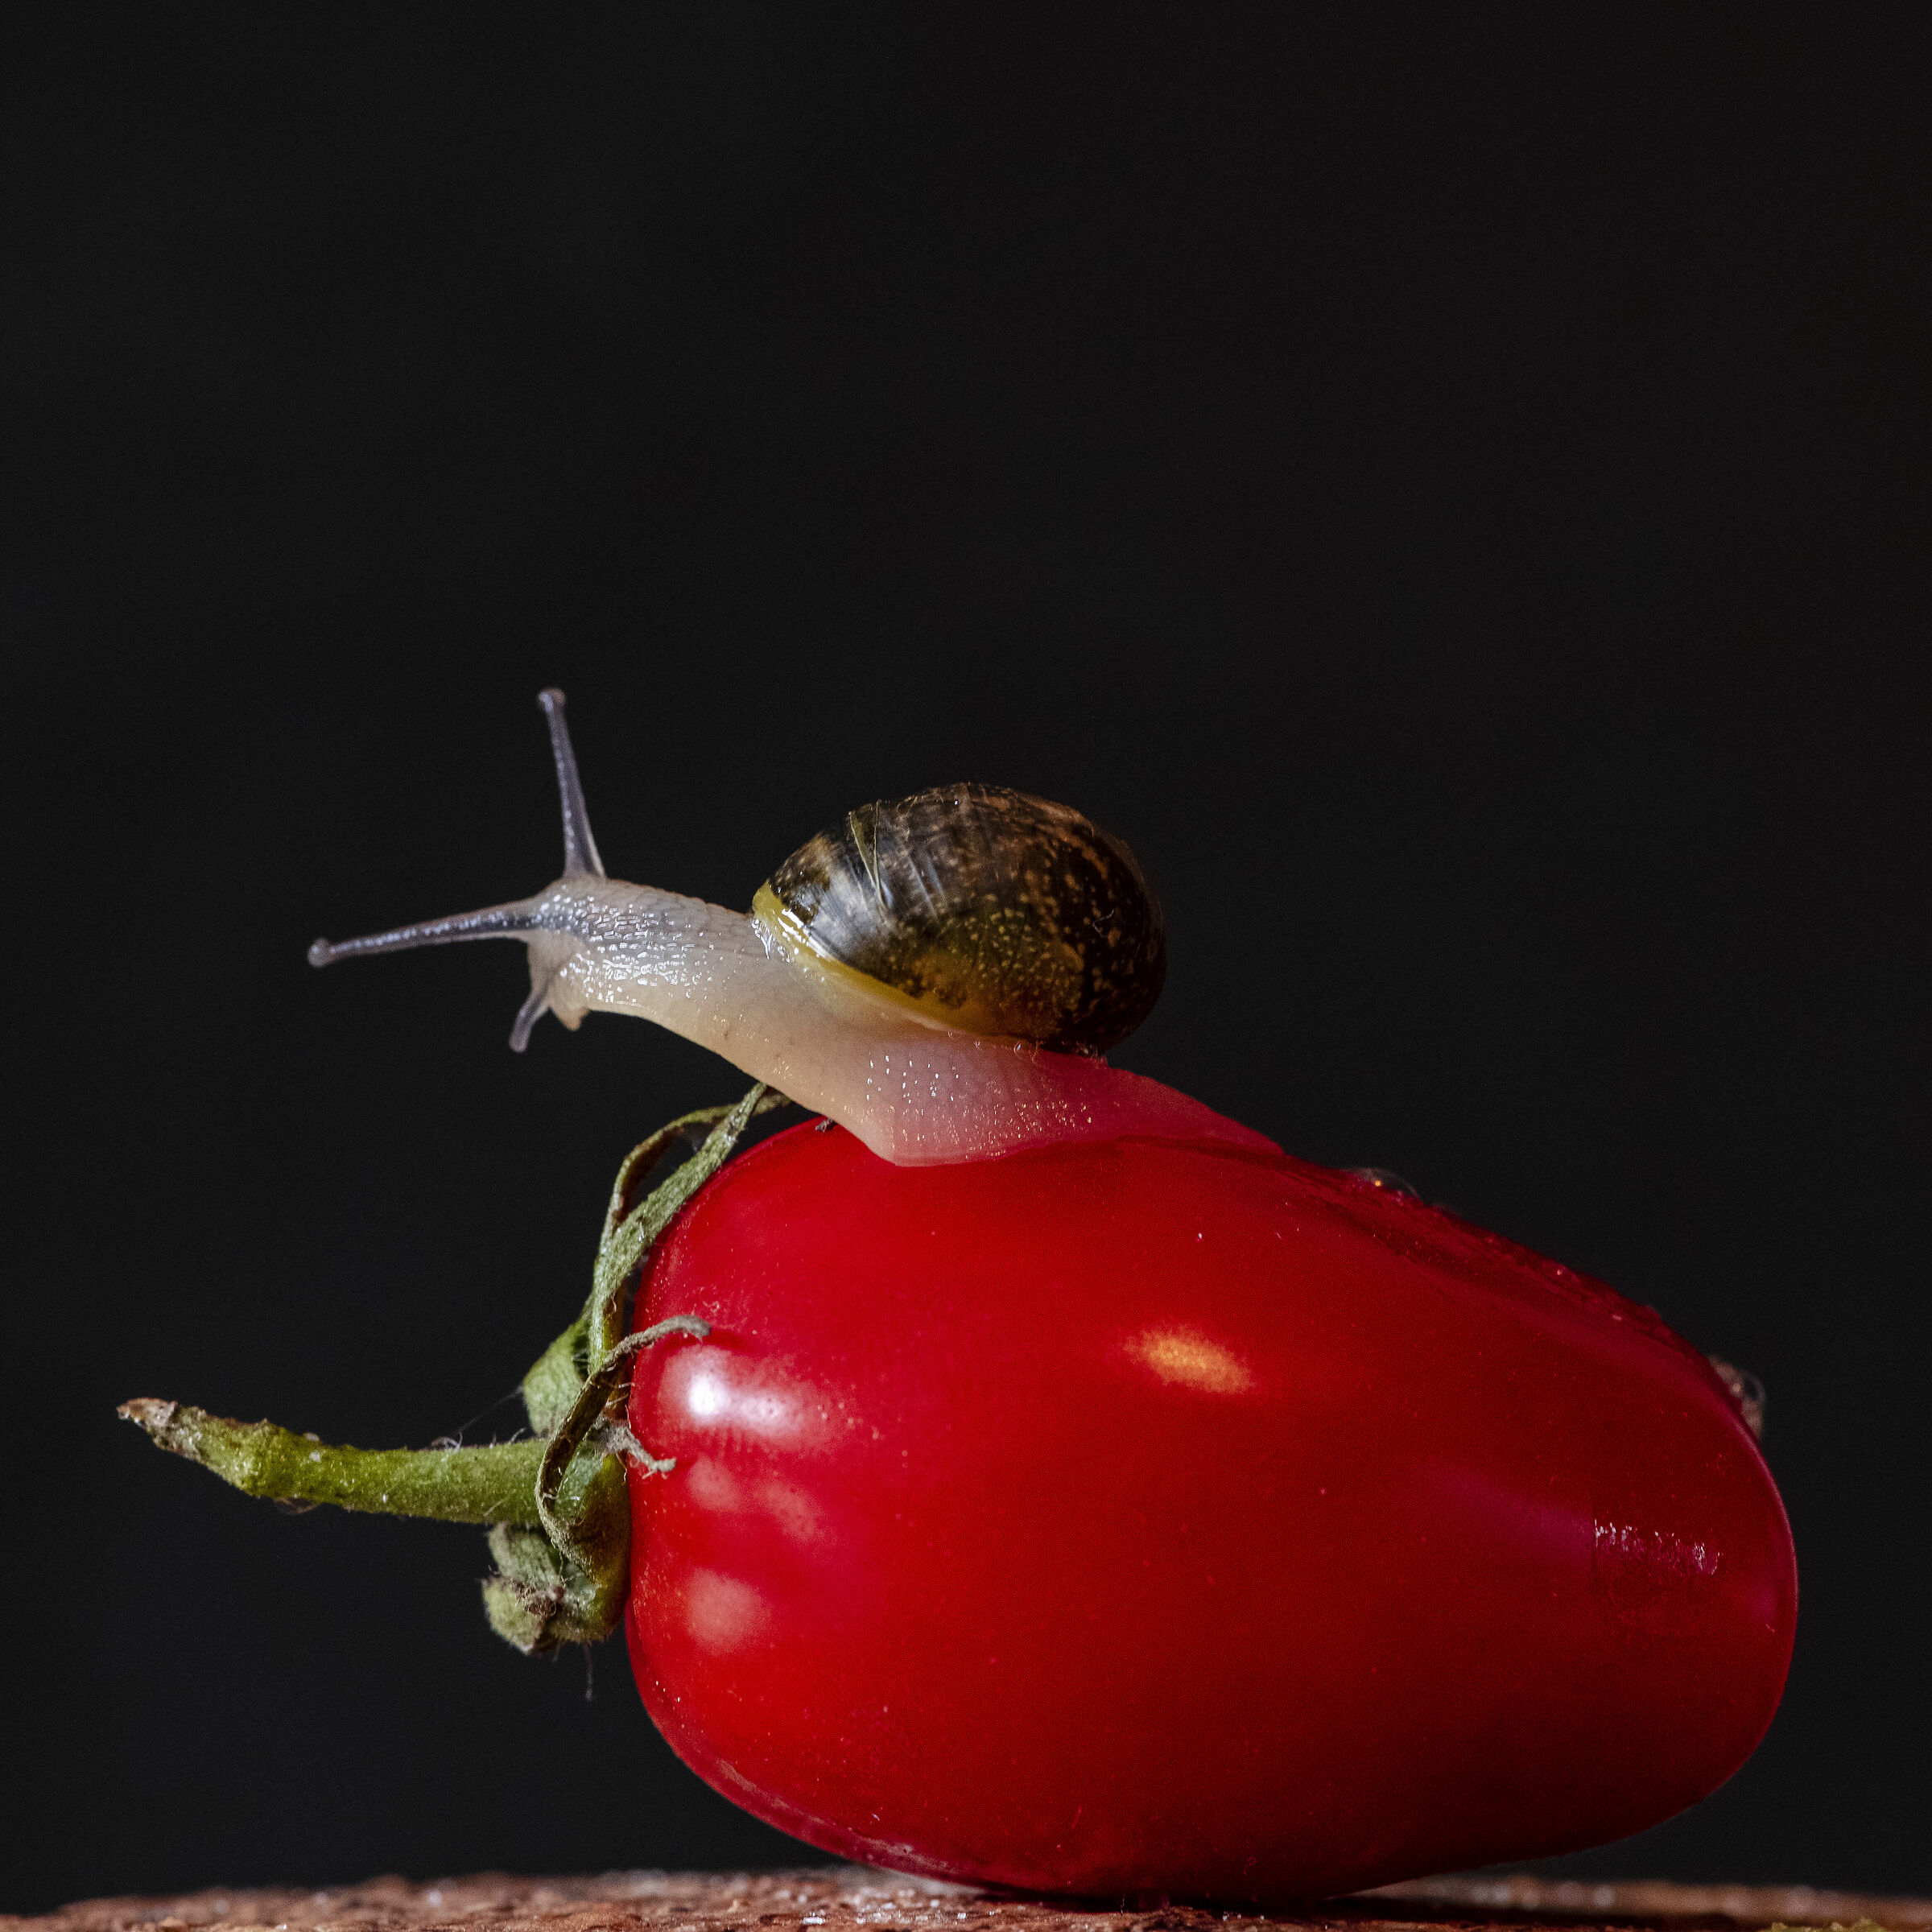 The snail and the tomato...